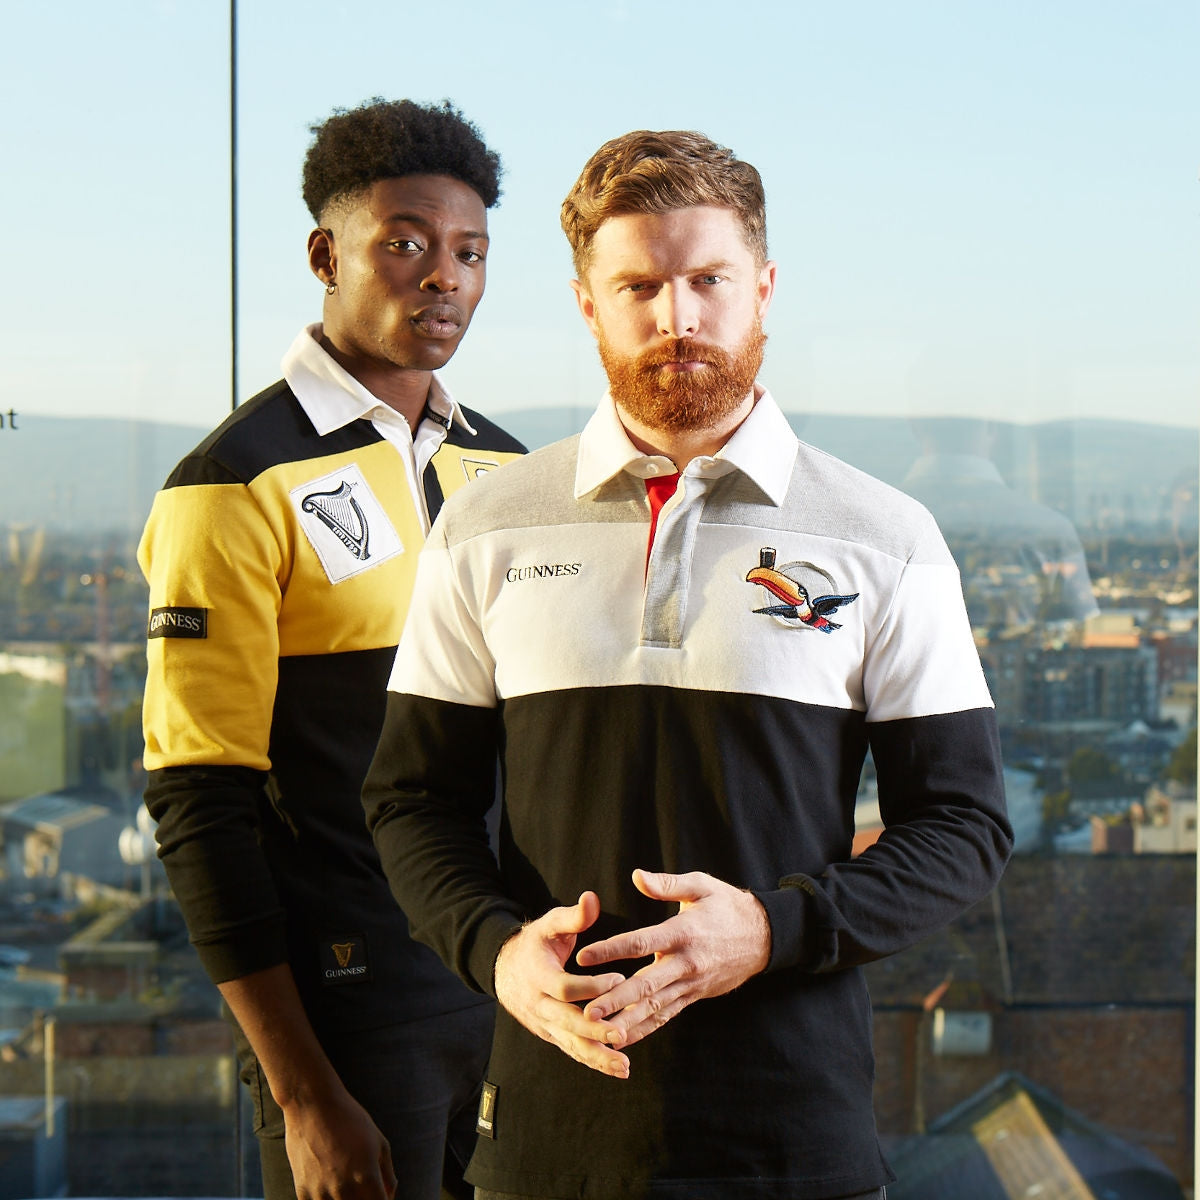 Guinness Toucan Rugby Jersey